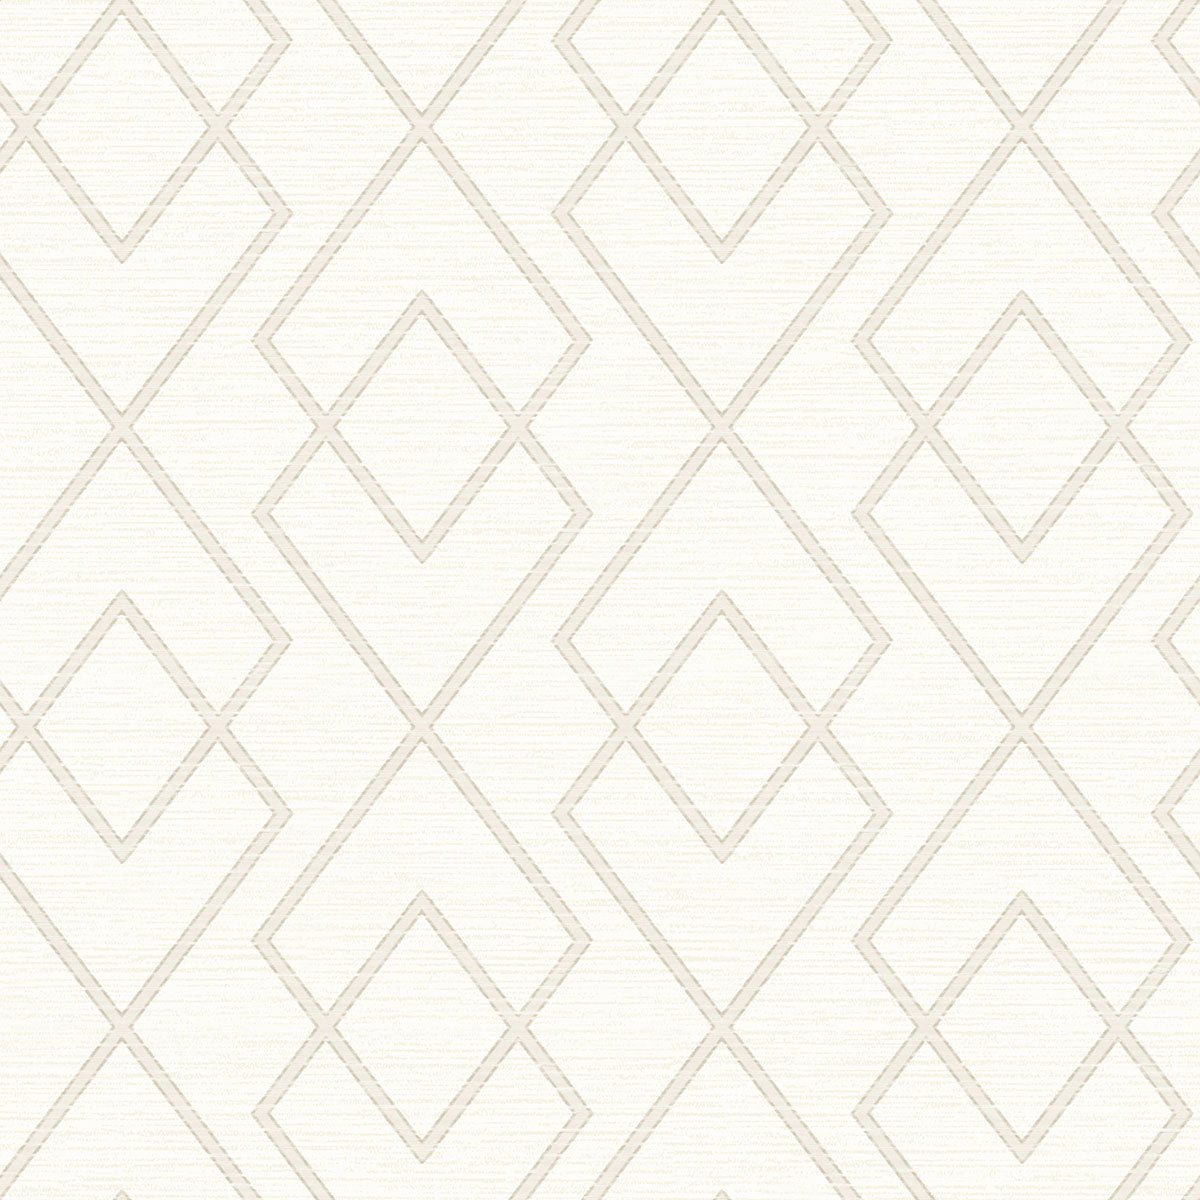 Search 3123-12423 Homestead Blaze Taupe Trellis Taupe by Chesapeake Wallpaper